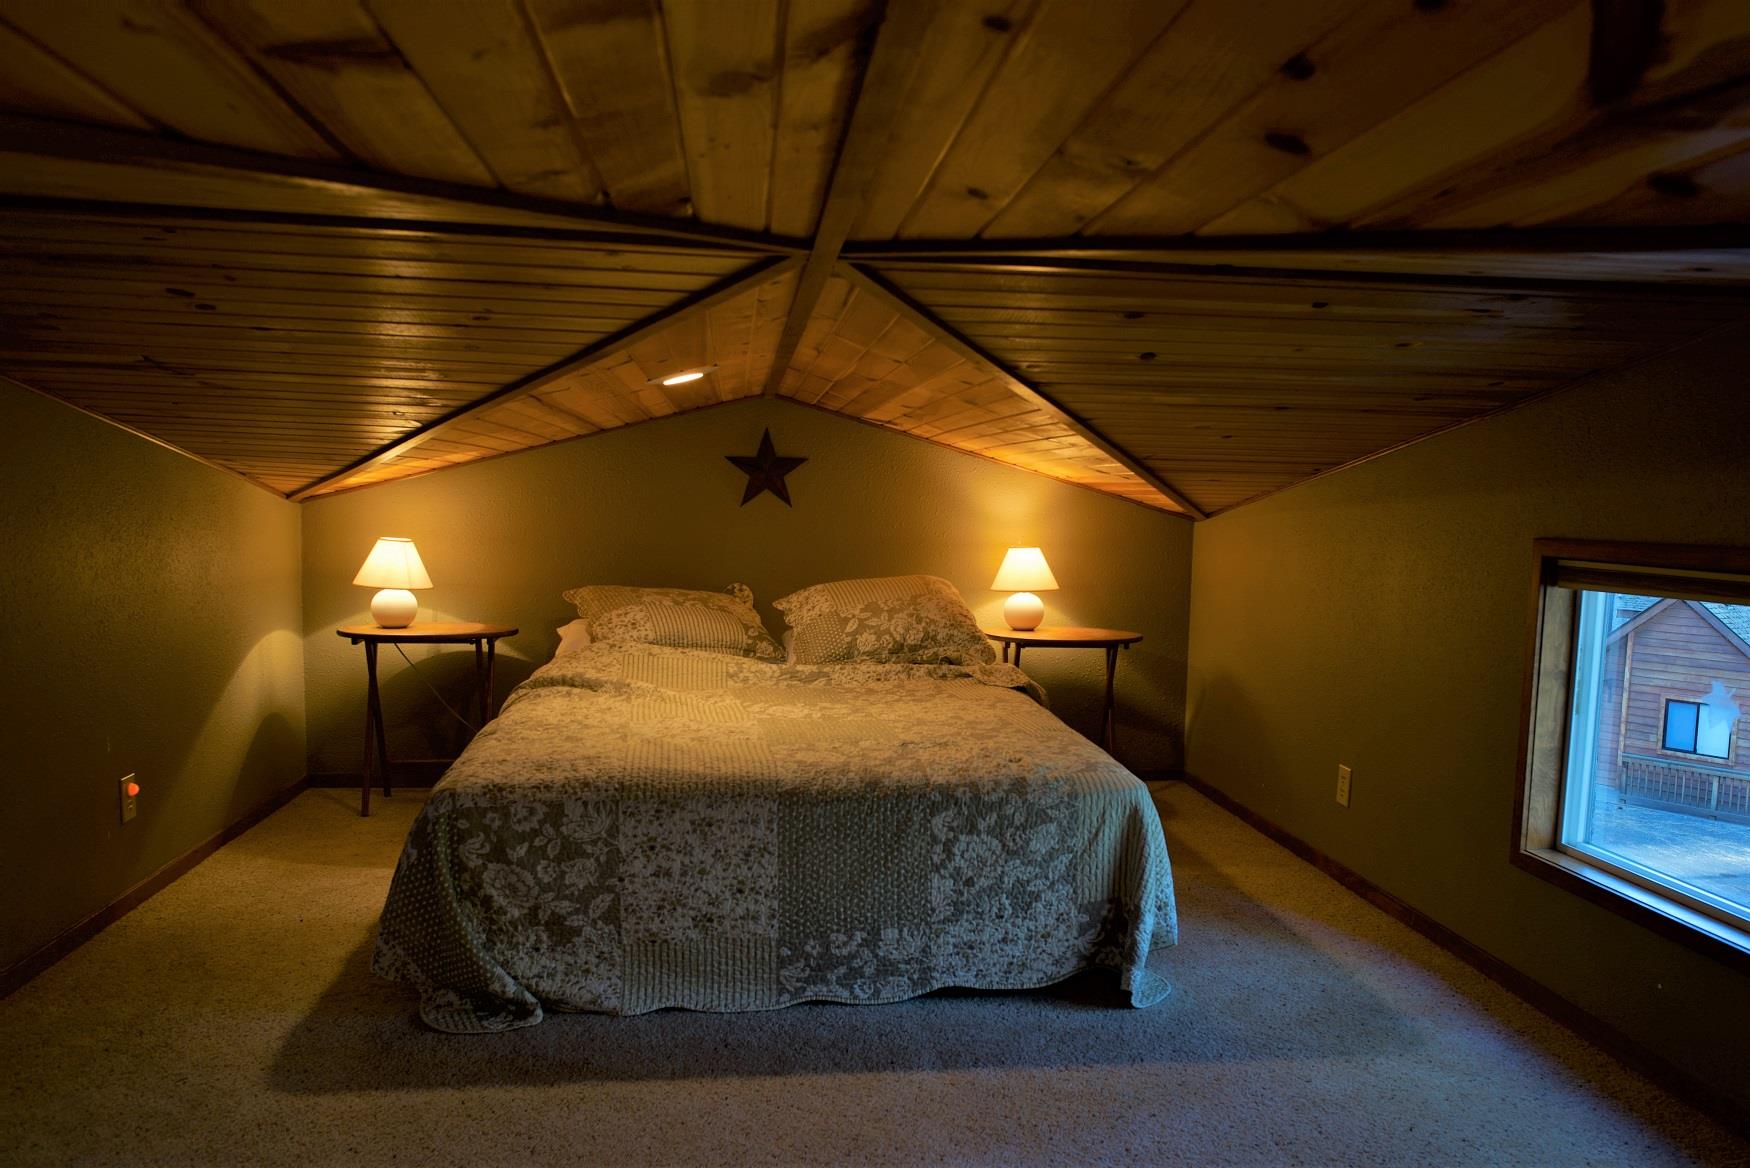 Get your best night sleep in the cozy queen bed in the loft of Alder Cabin at Cold Springs Resort & RV Park in Camp Sherman, Oregon